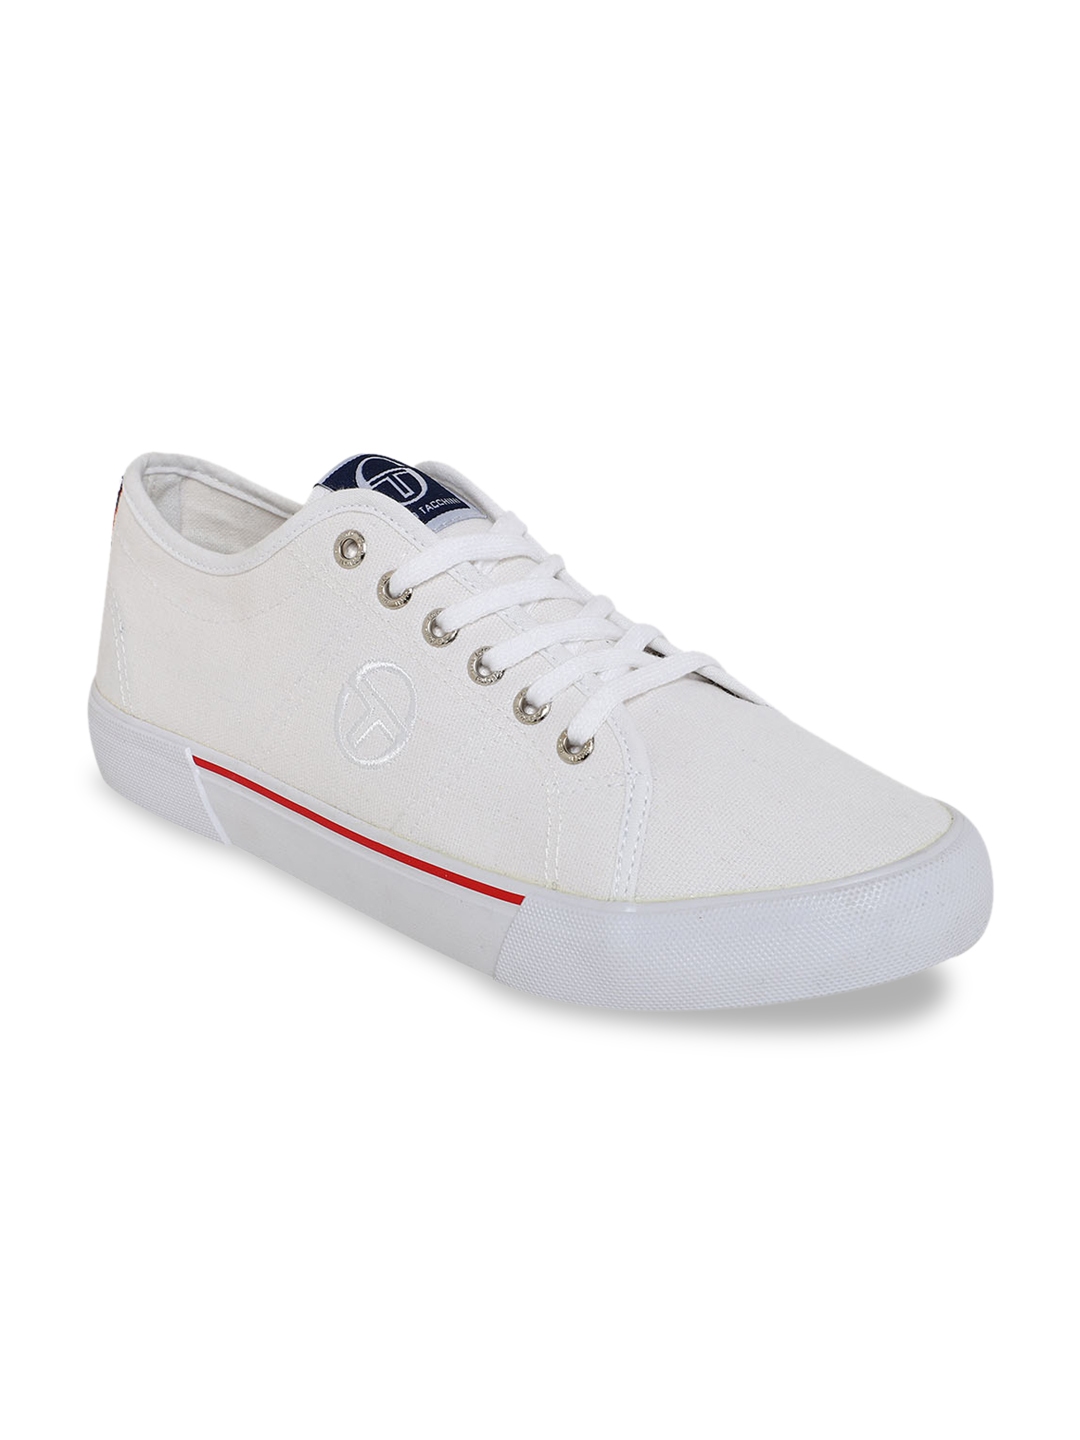 Buy Sergio Tacchini Men White Solid Sneakers - Casual Shoes for Men ...